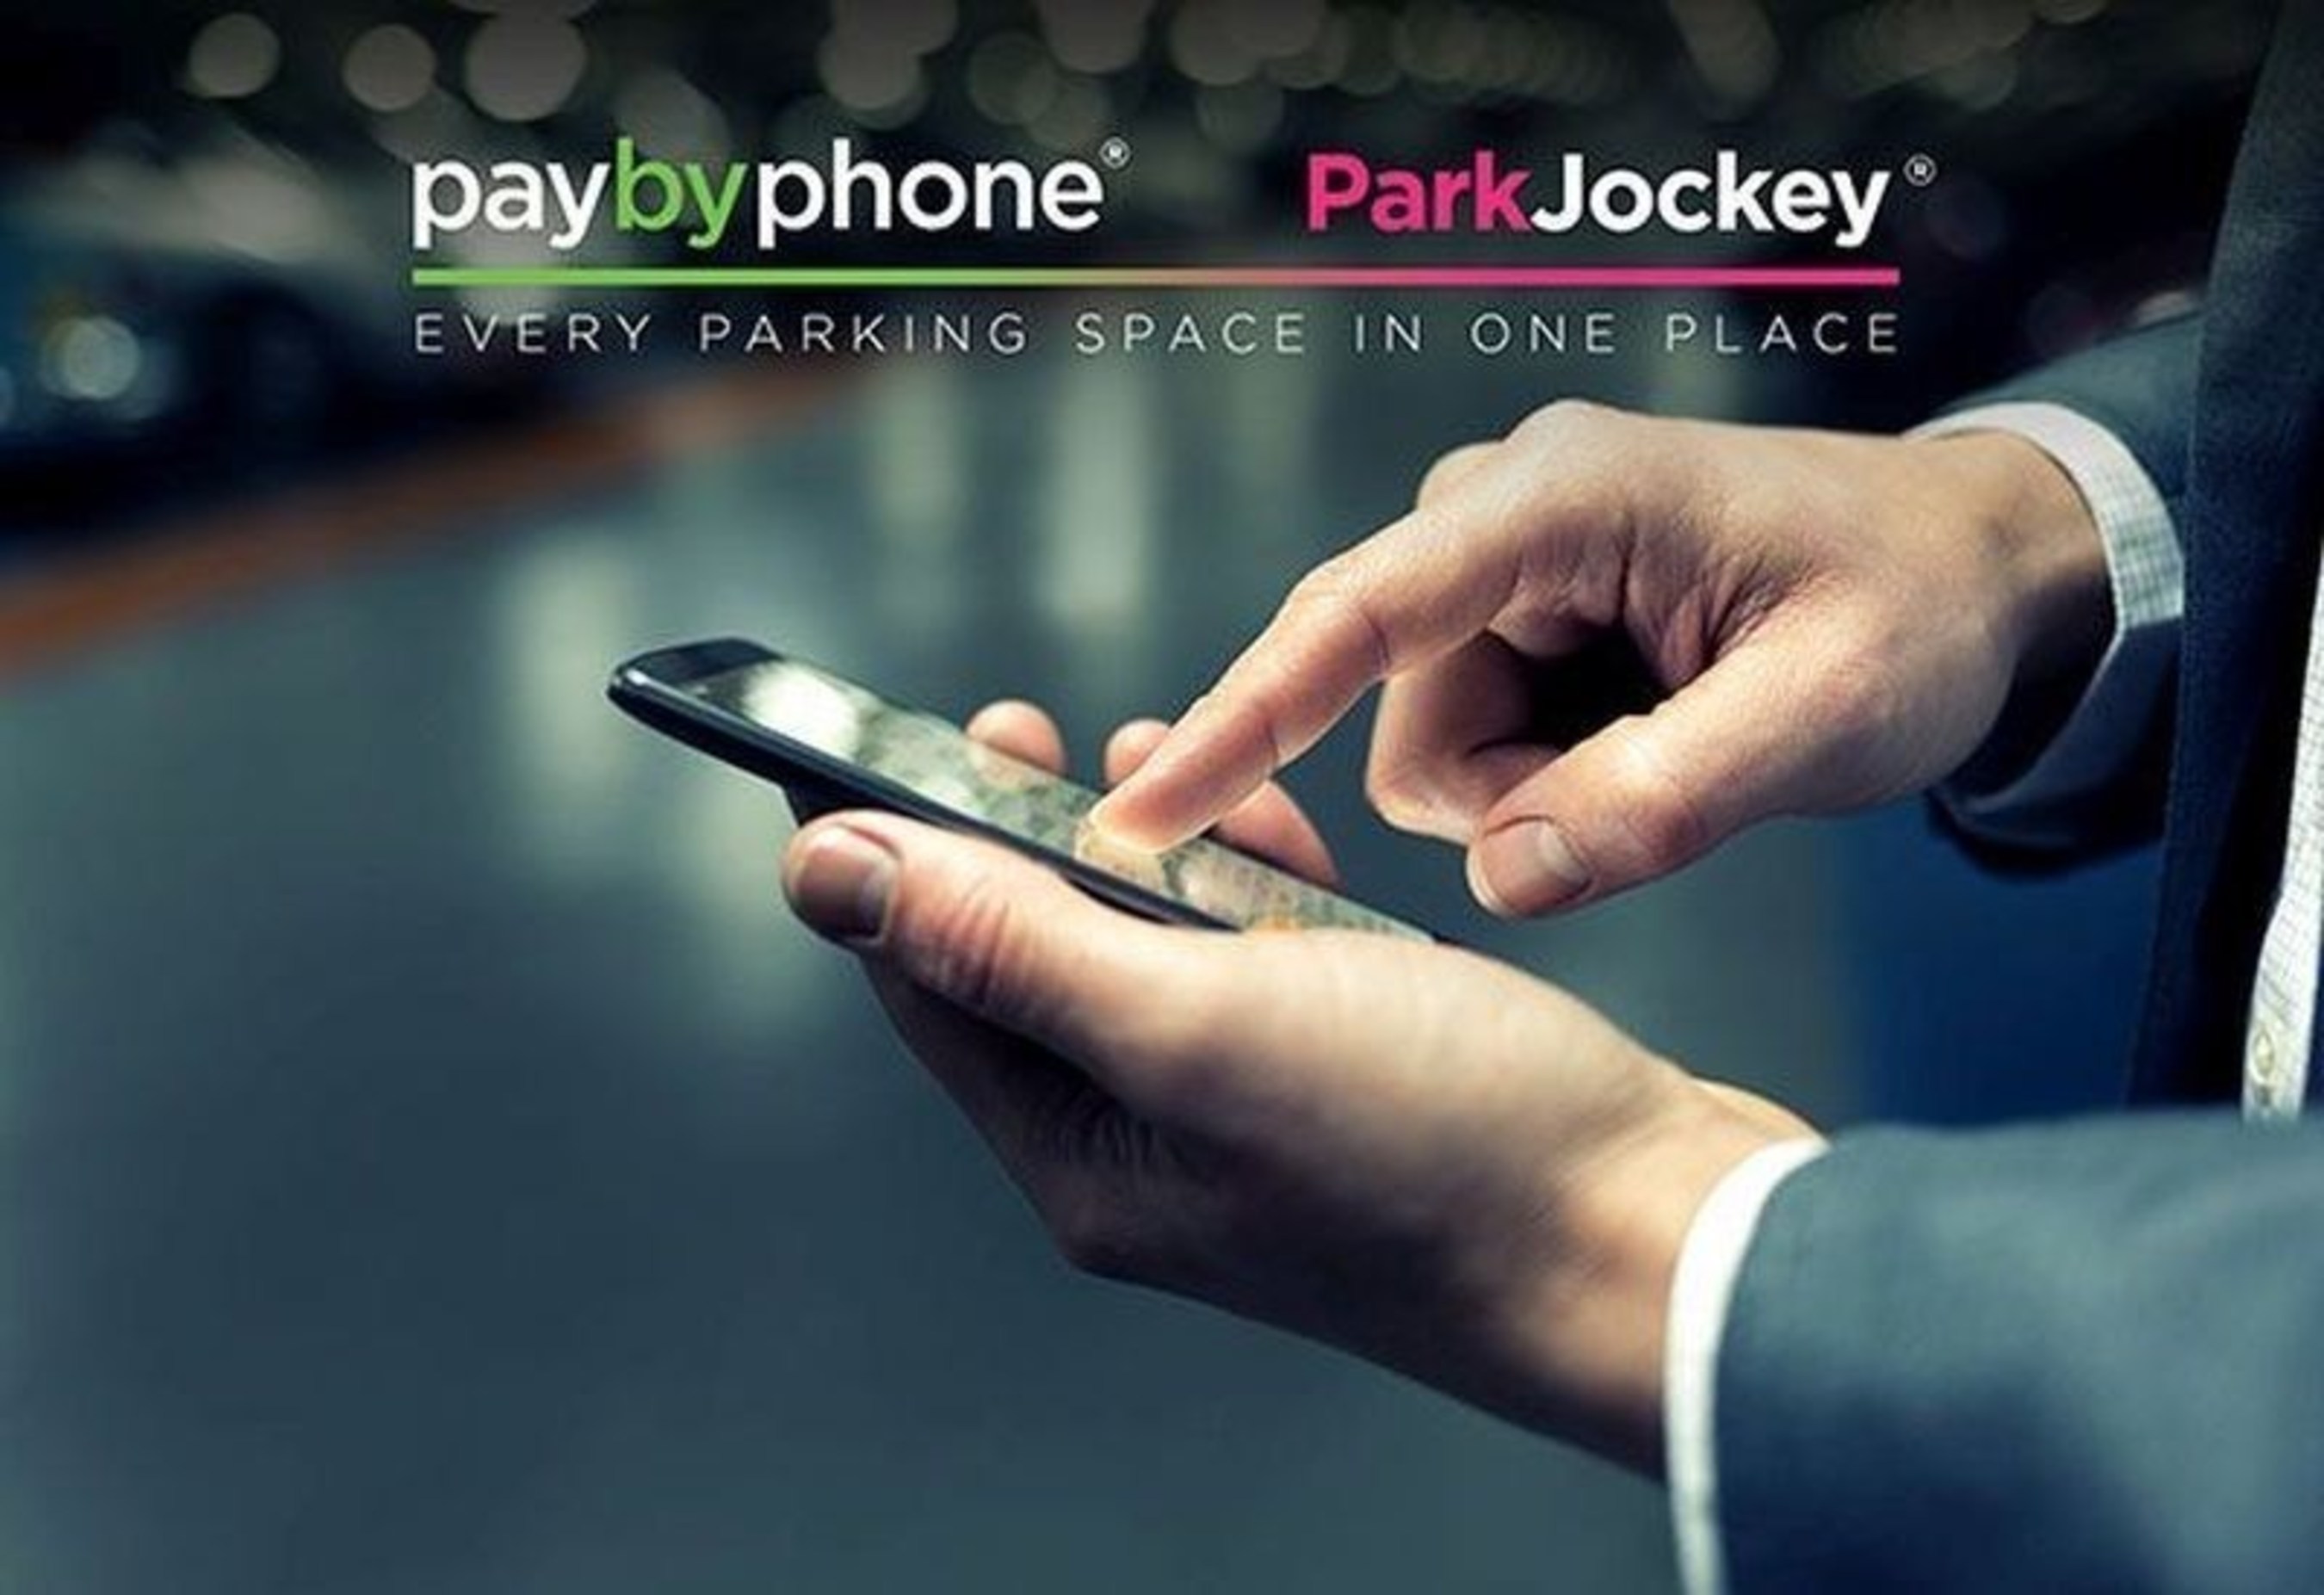 The partnership between PayByPhone and the fast-growing start-up ParkJockey could herald the rise of the long-awaited "unicorn" in parking tech. (PRNewsFoto/ParkJockey and PayByPhone) (PRNewsFoto/ParkJockey and PayByPhone)